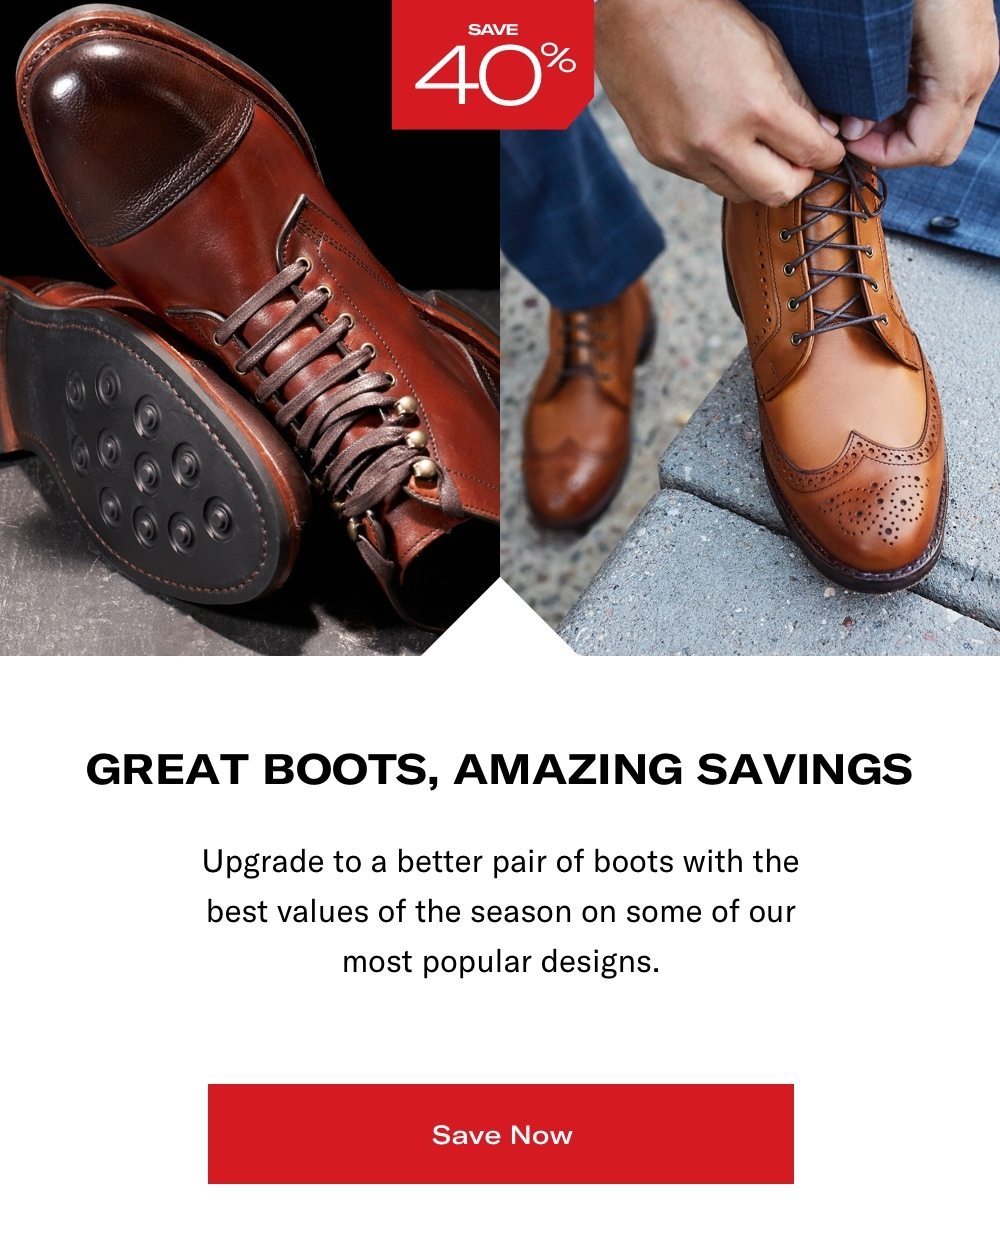 Save on Boots Now